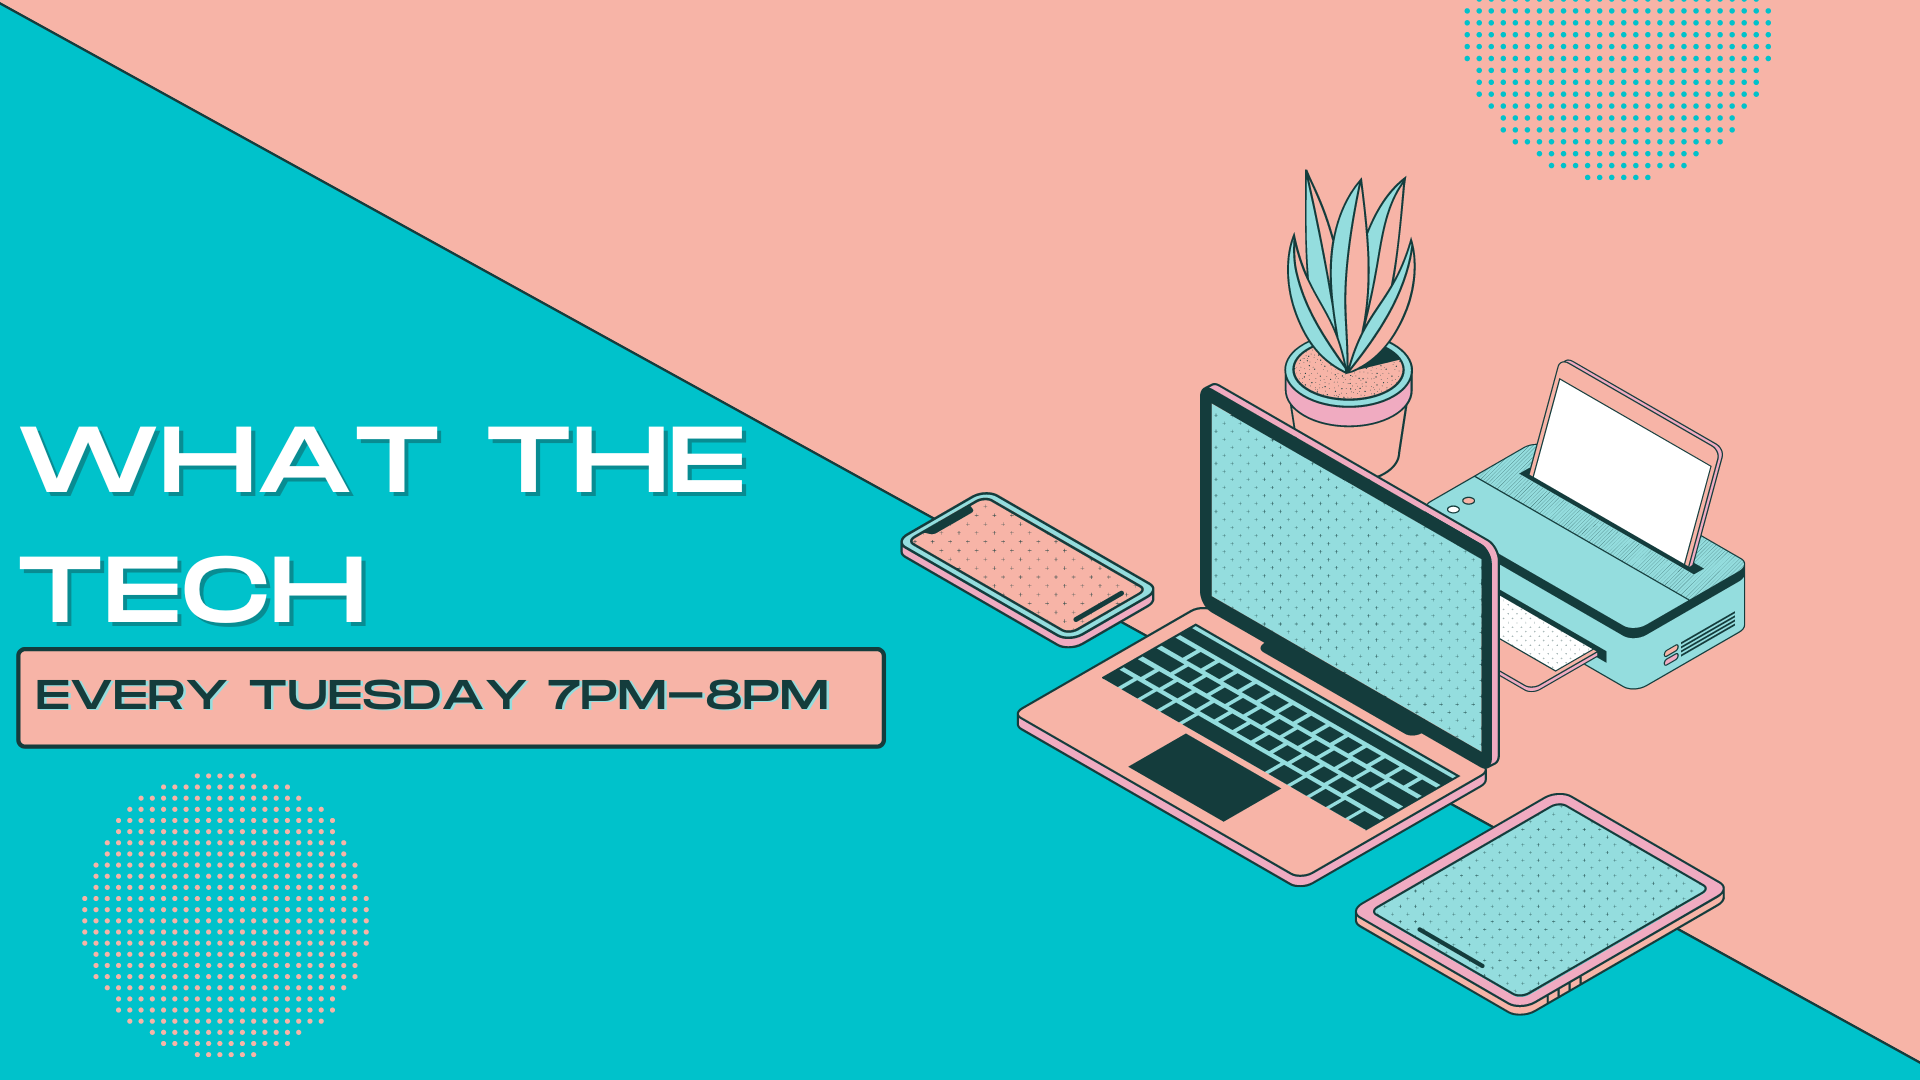 A smartphone, computer, tablet and printer with a succulent. What the Tech. Every Tuesday 7pm-8pm.